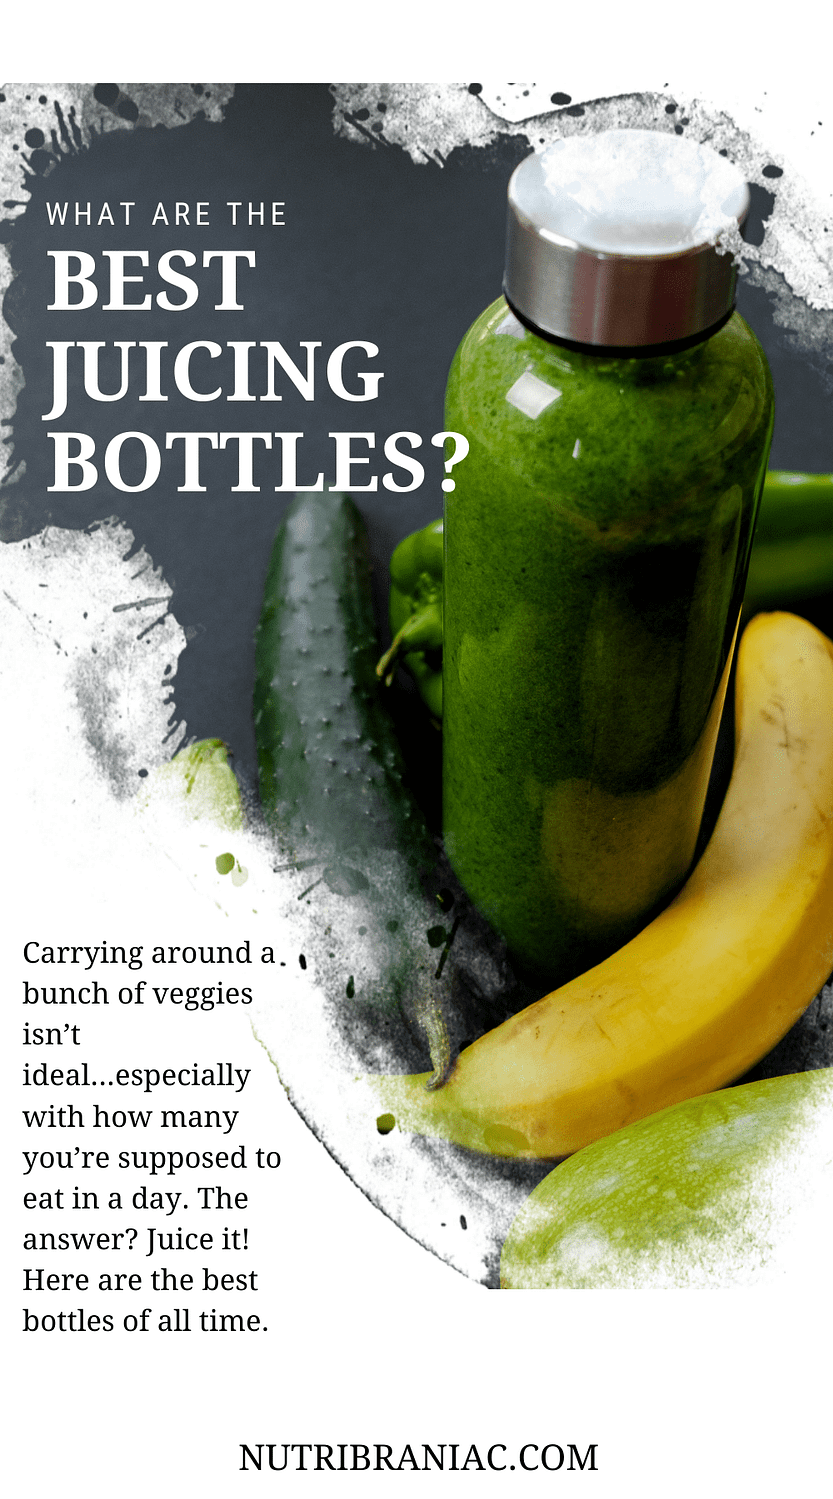 Graphic image of a glass juice bottle filled with green juice on a marble table next to fruits and vegetables with text overlay "What are the Best Juicing Bottles"